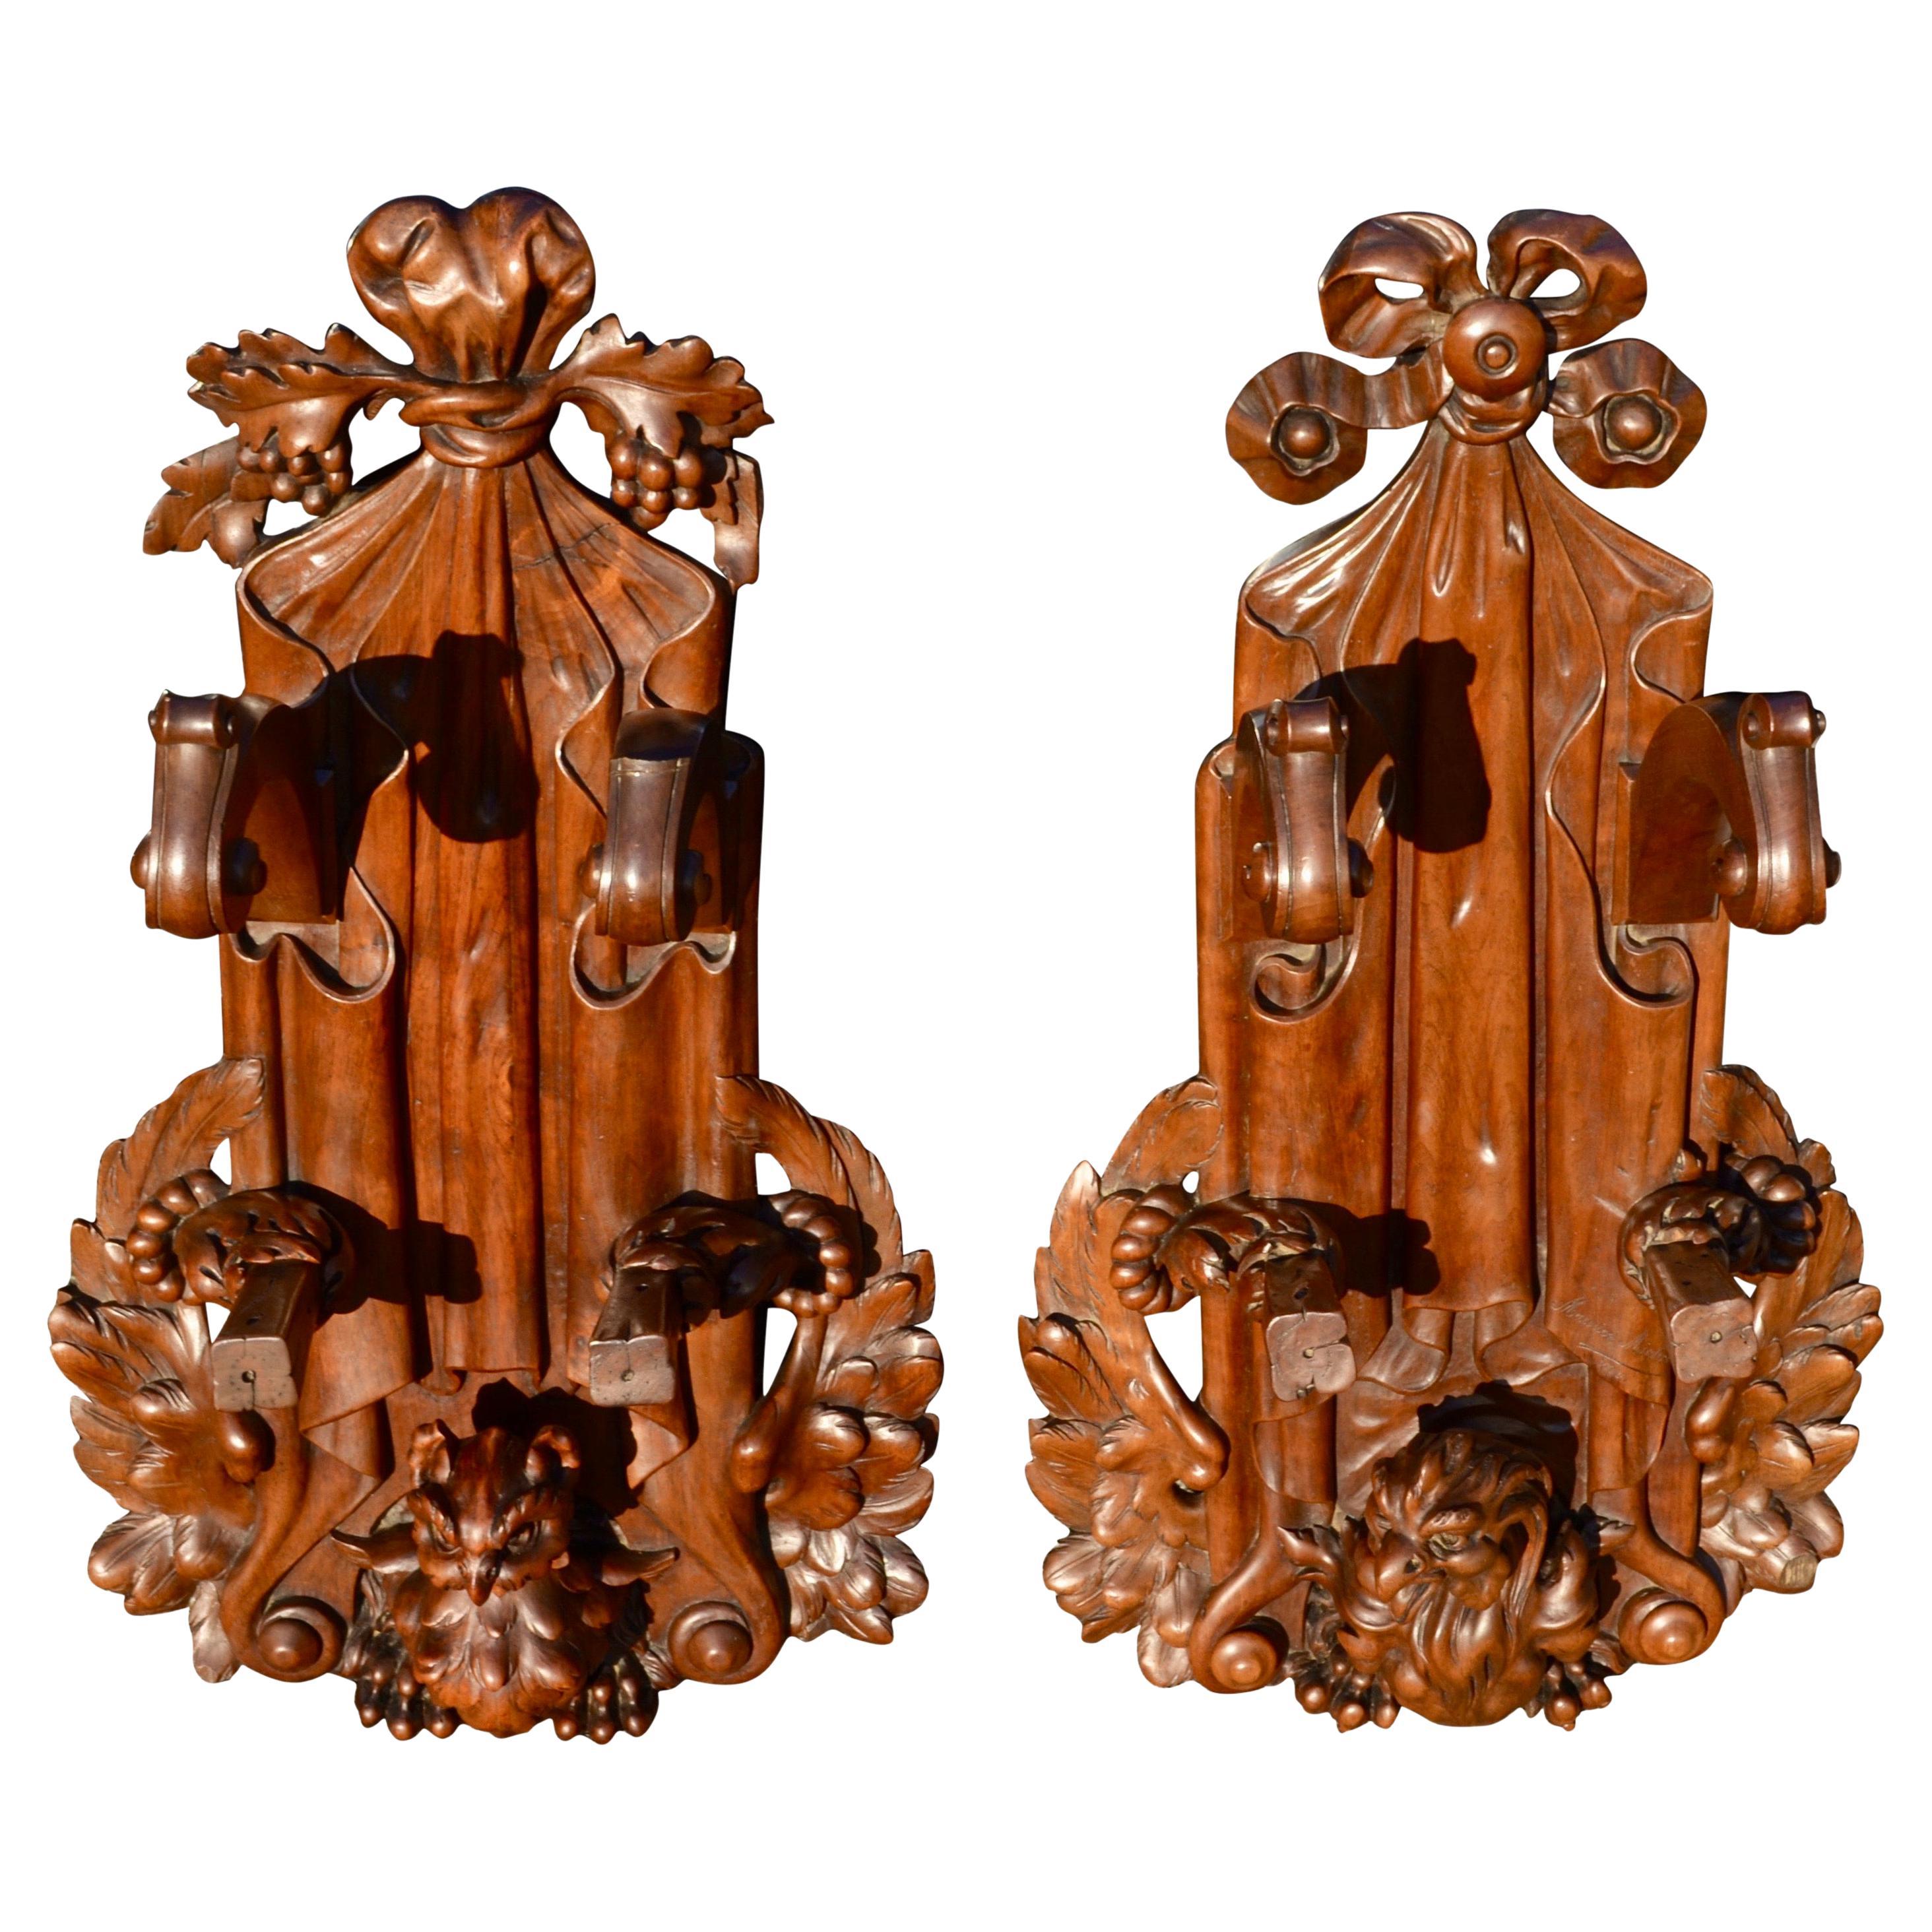 Pair of 19th C Signed Black Forest Style French Carved Walnut Hunting Gun Racks For Sale